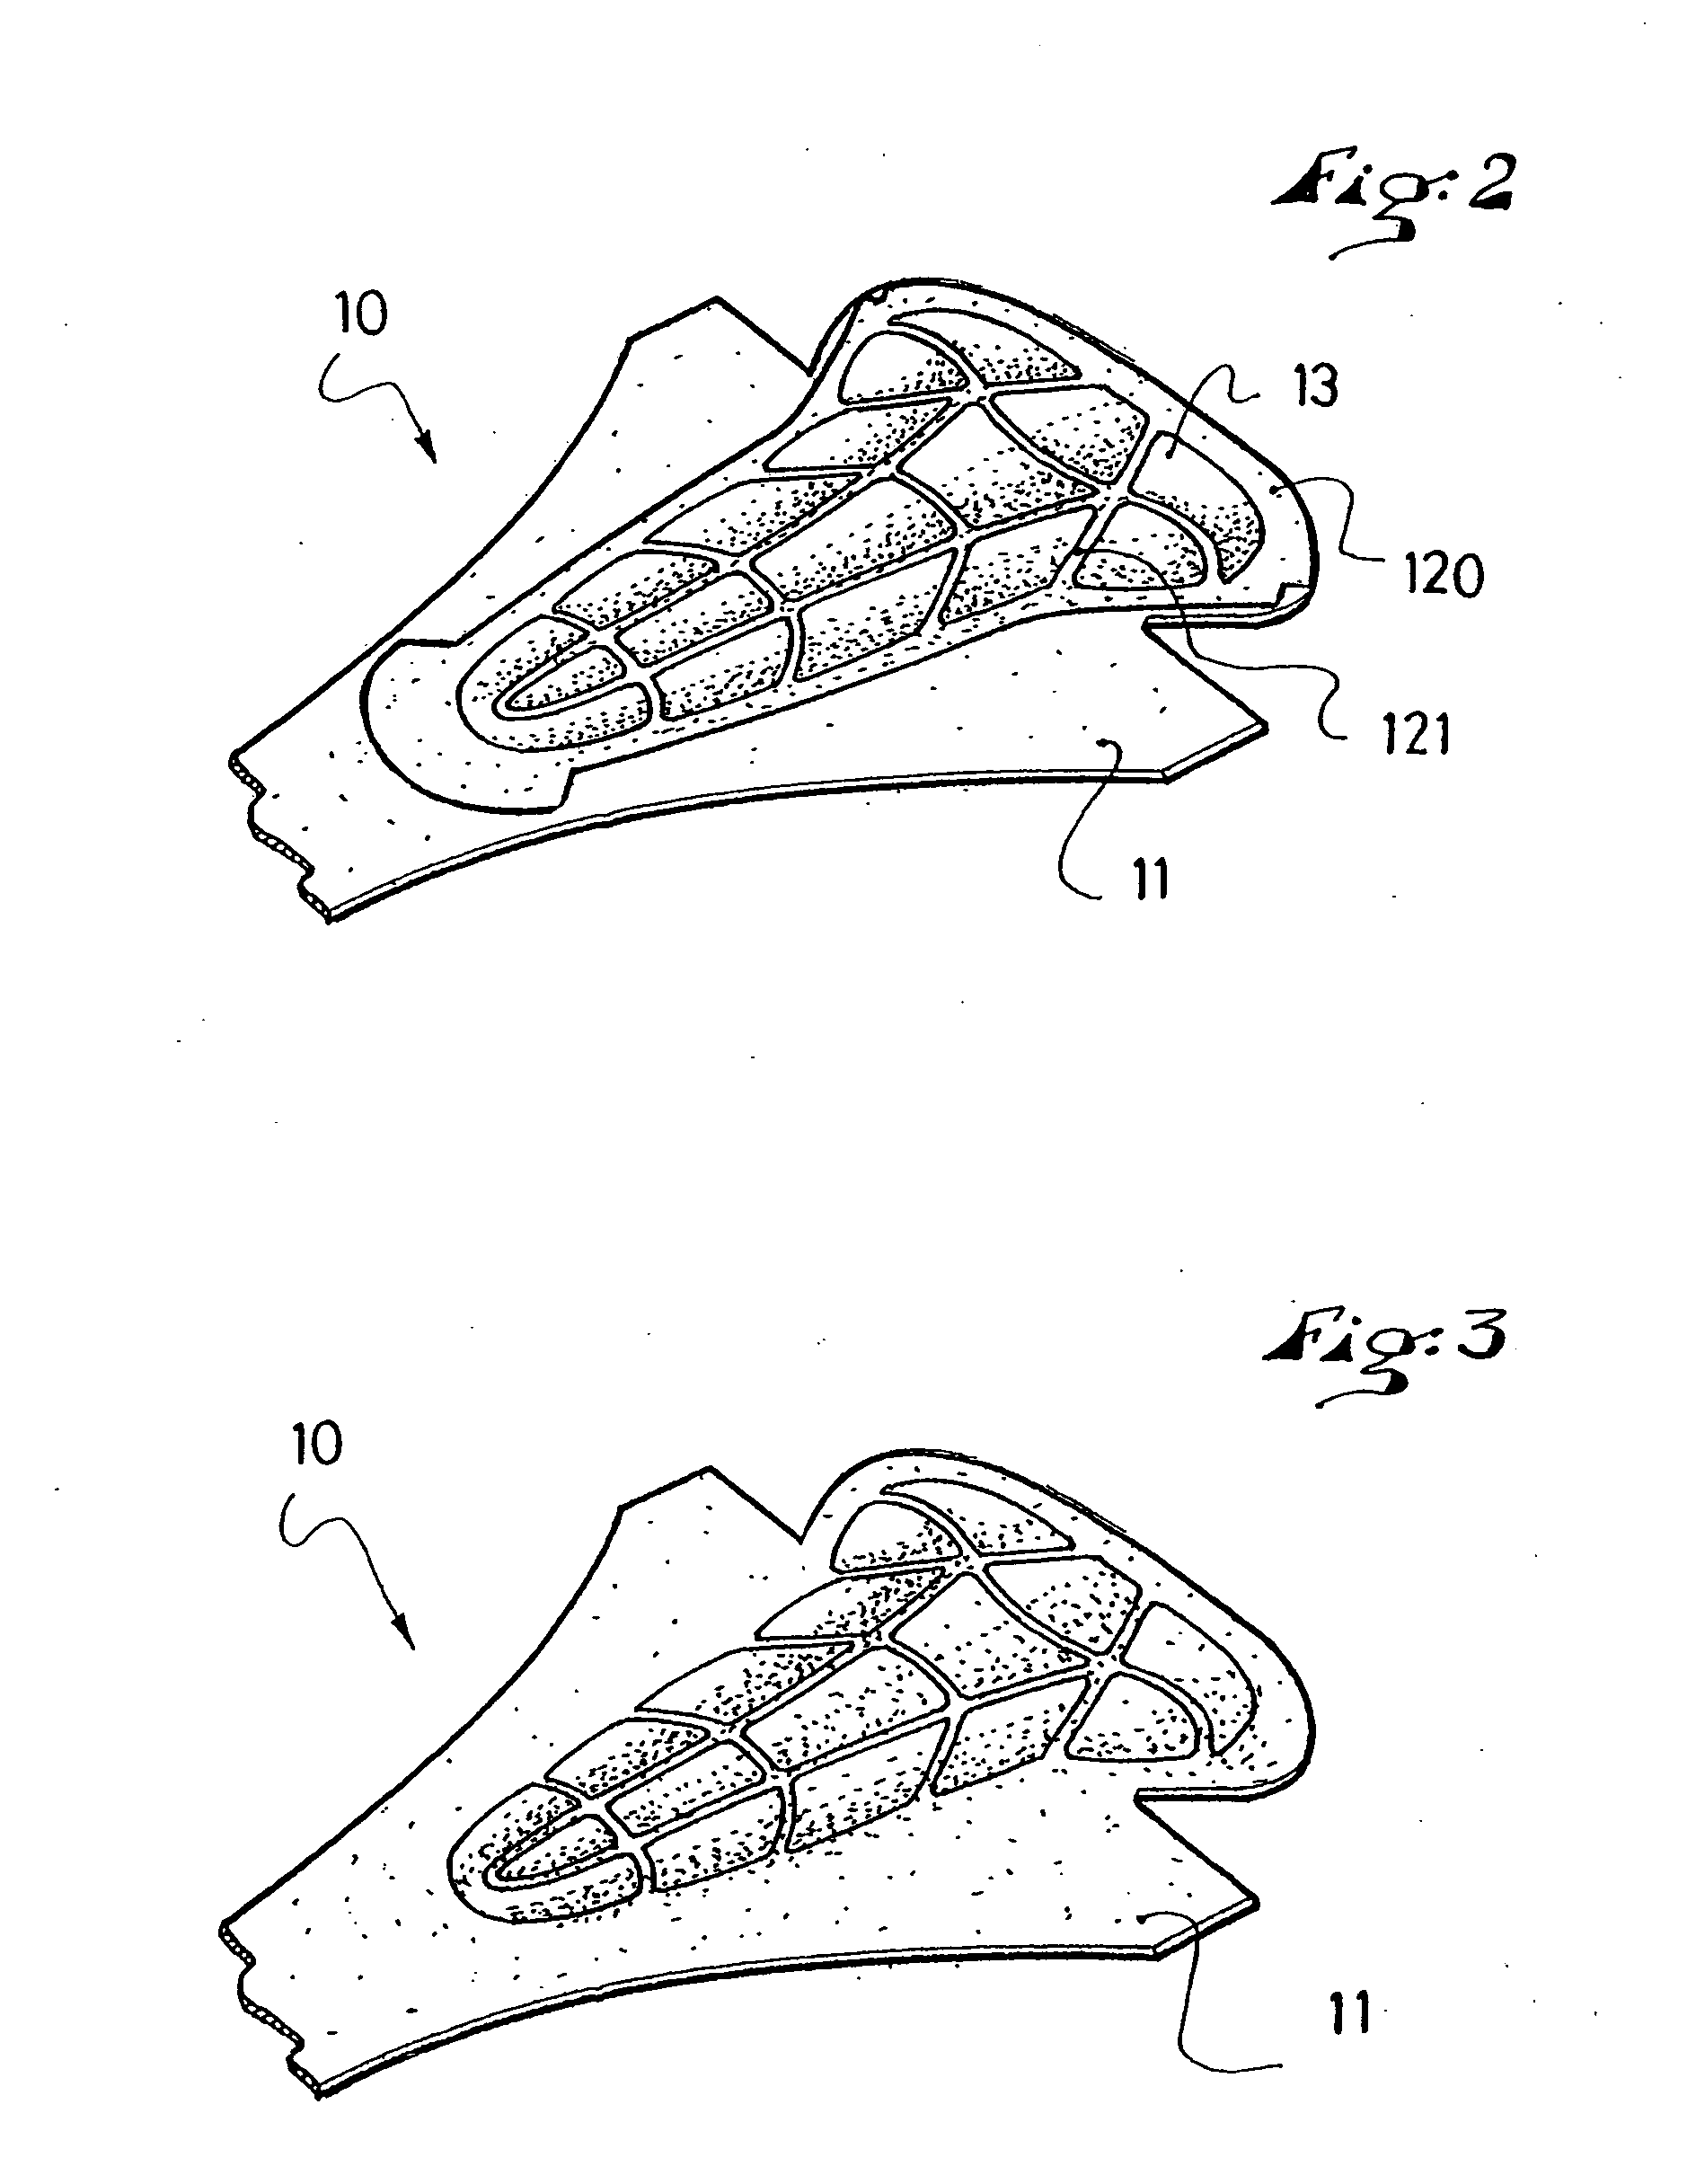 Comfort element for clothing or an article of footwear, a method of manufacturing, and an article having such an element